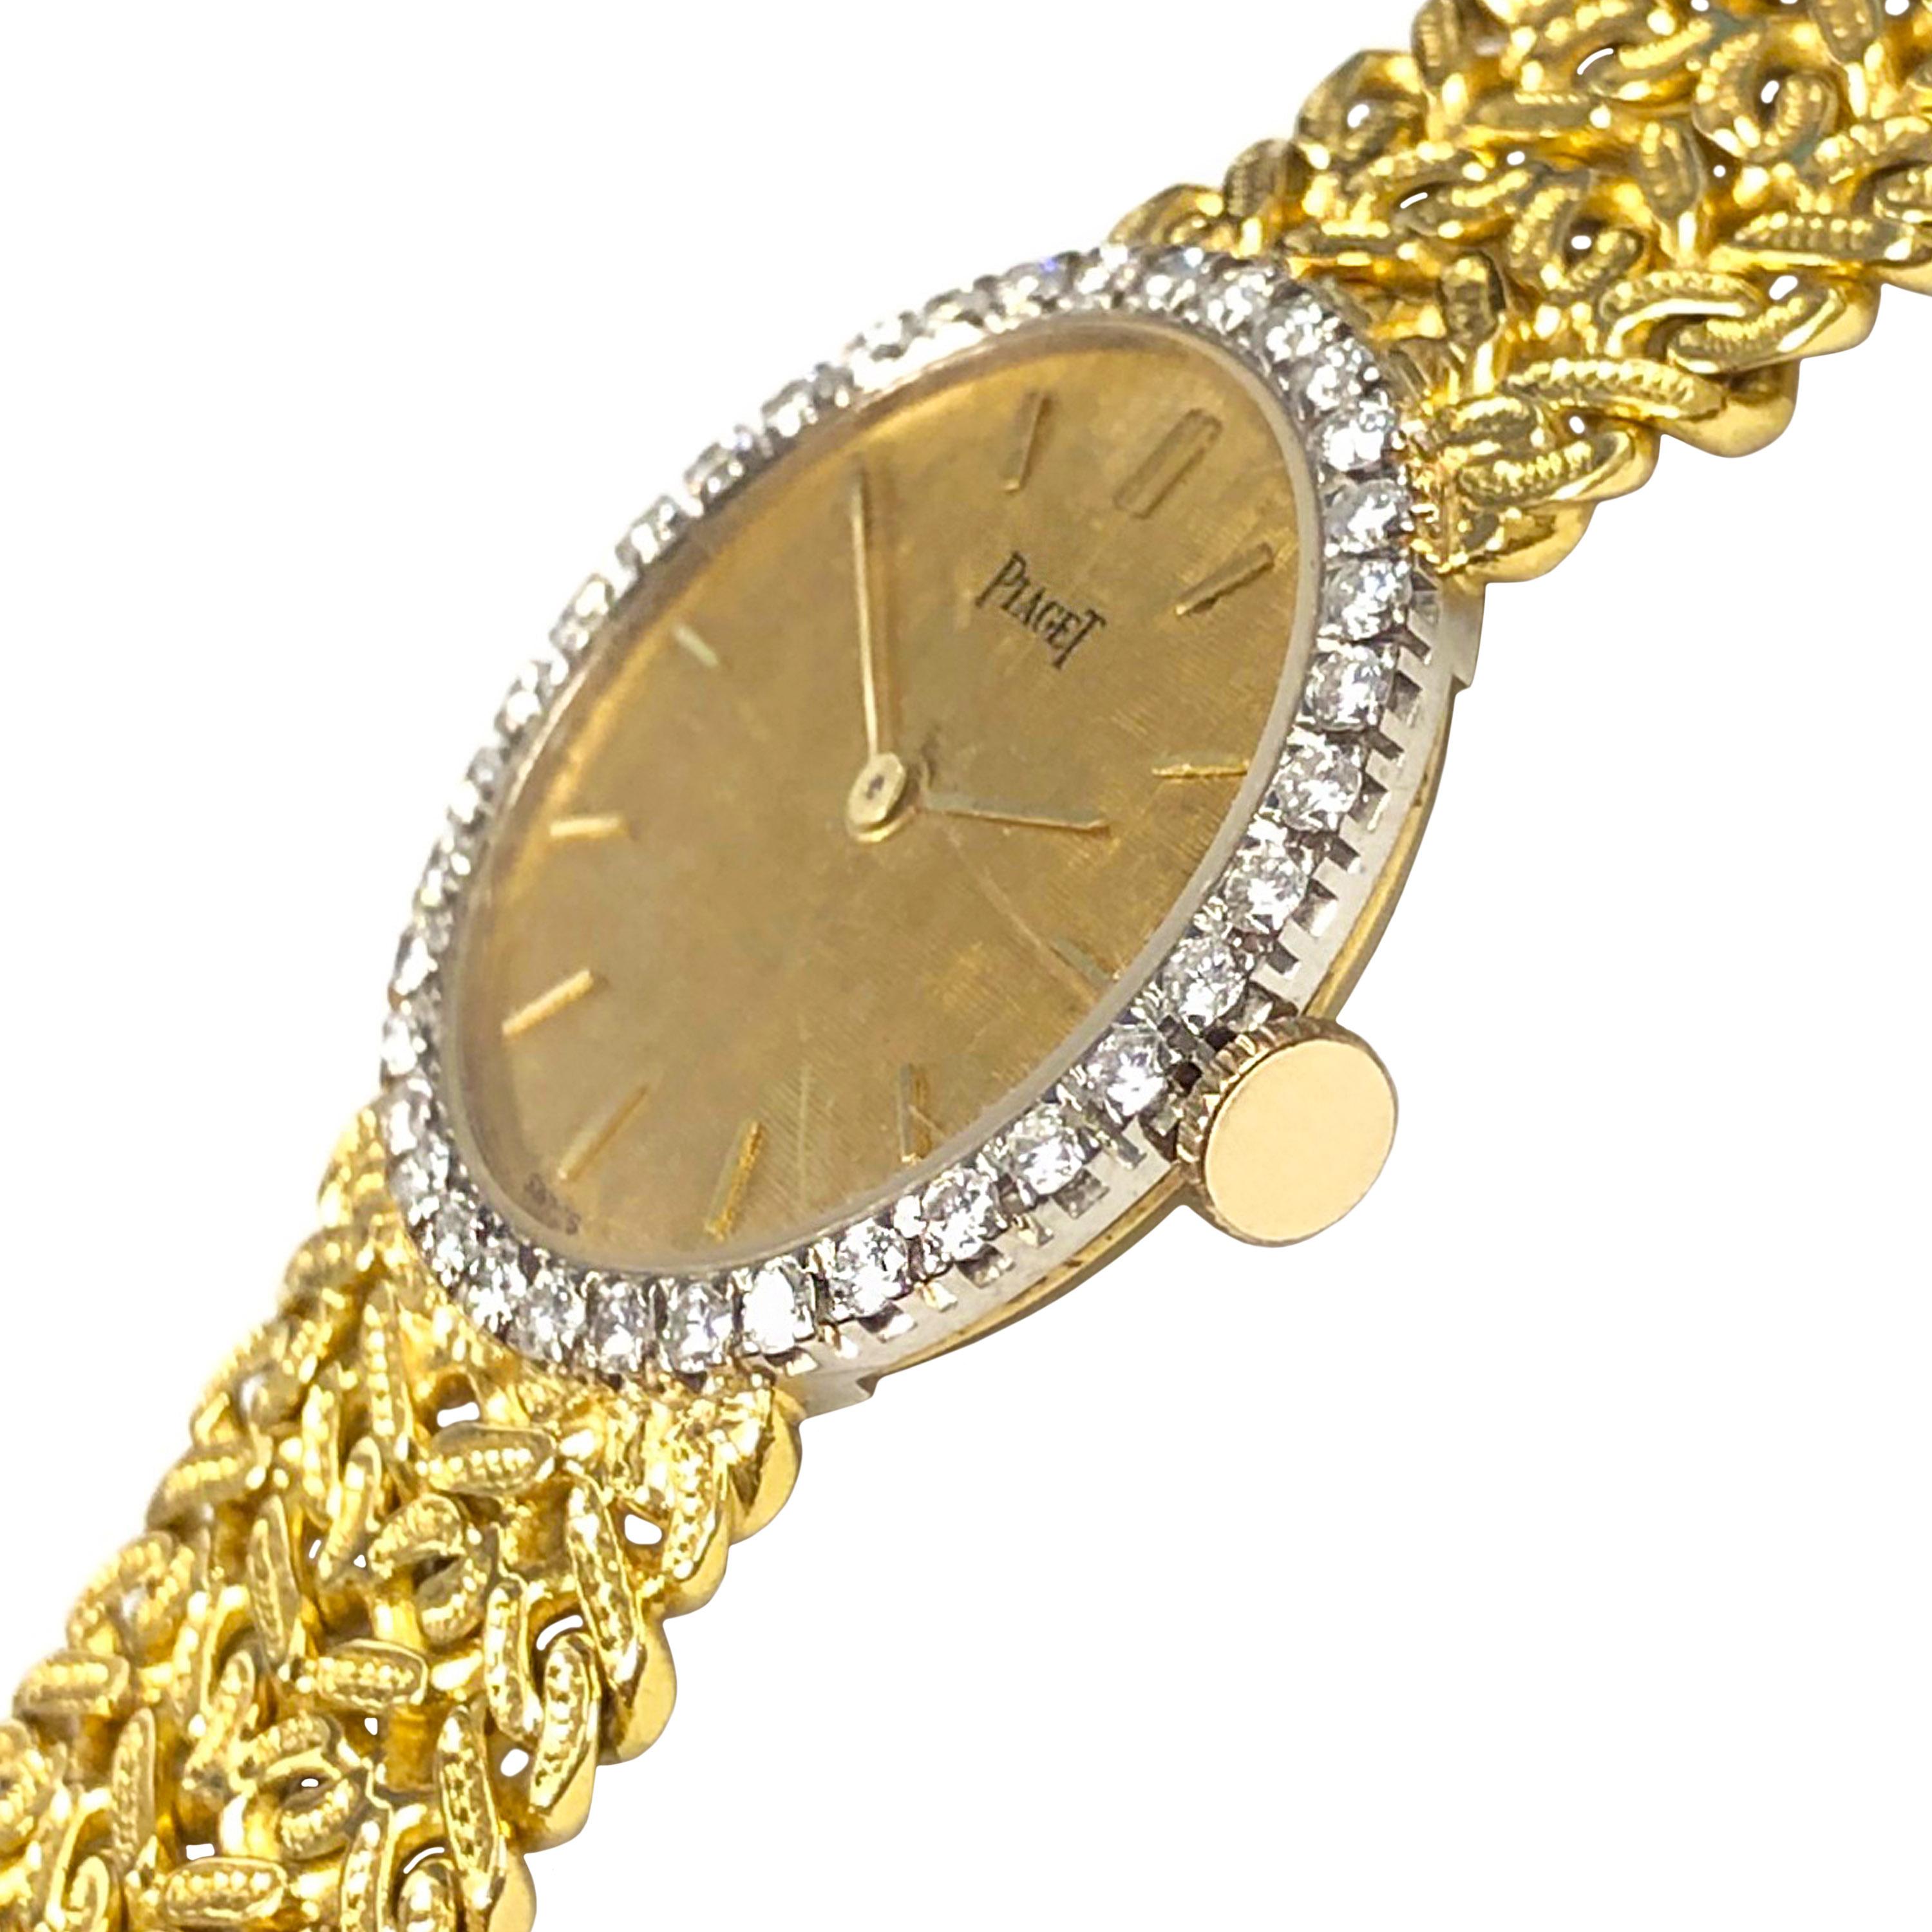 Circa 1970s Piaget Ladies Wrist Watch, 24 MM 2 Piece 18K Yellow Gold case with White Gold Bezel set with Round Brilliant cut Diamonds totaling 1 Carat. Mechanical, Manual wind 17 jewel Movement, Gold textured dial with raised Gold markers. 5/8 inch